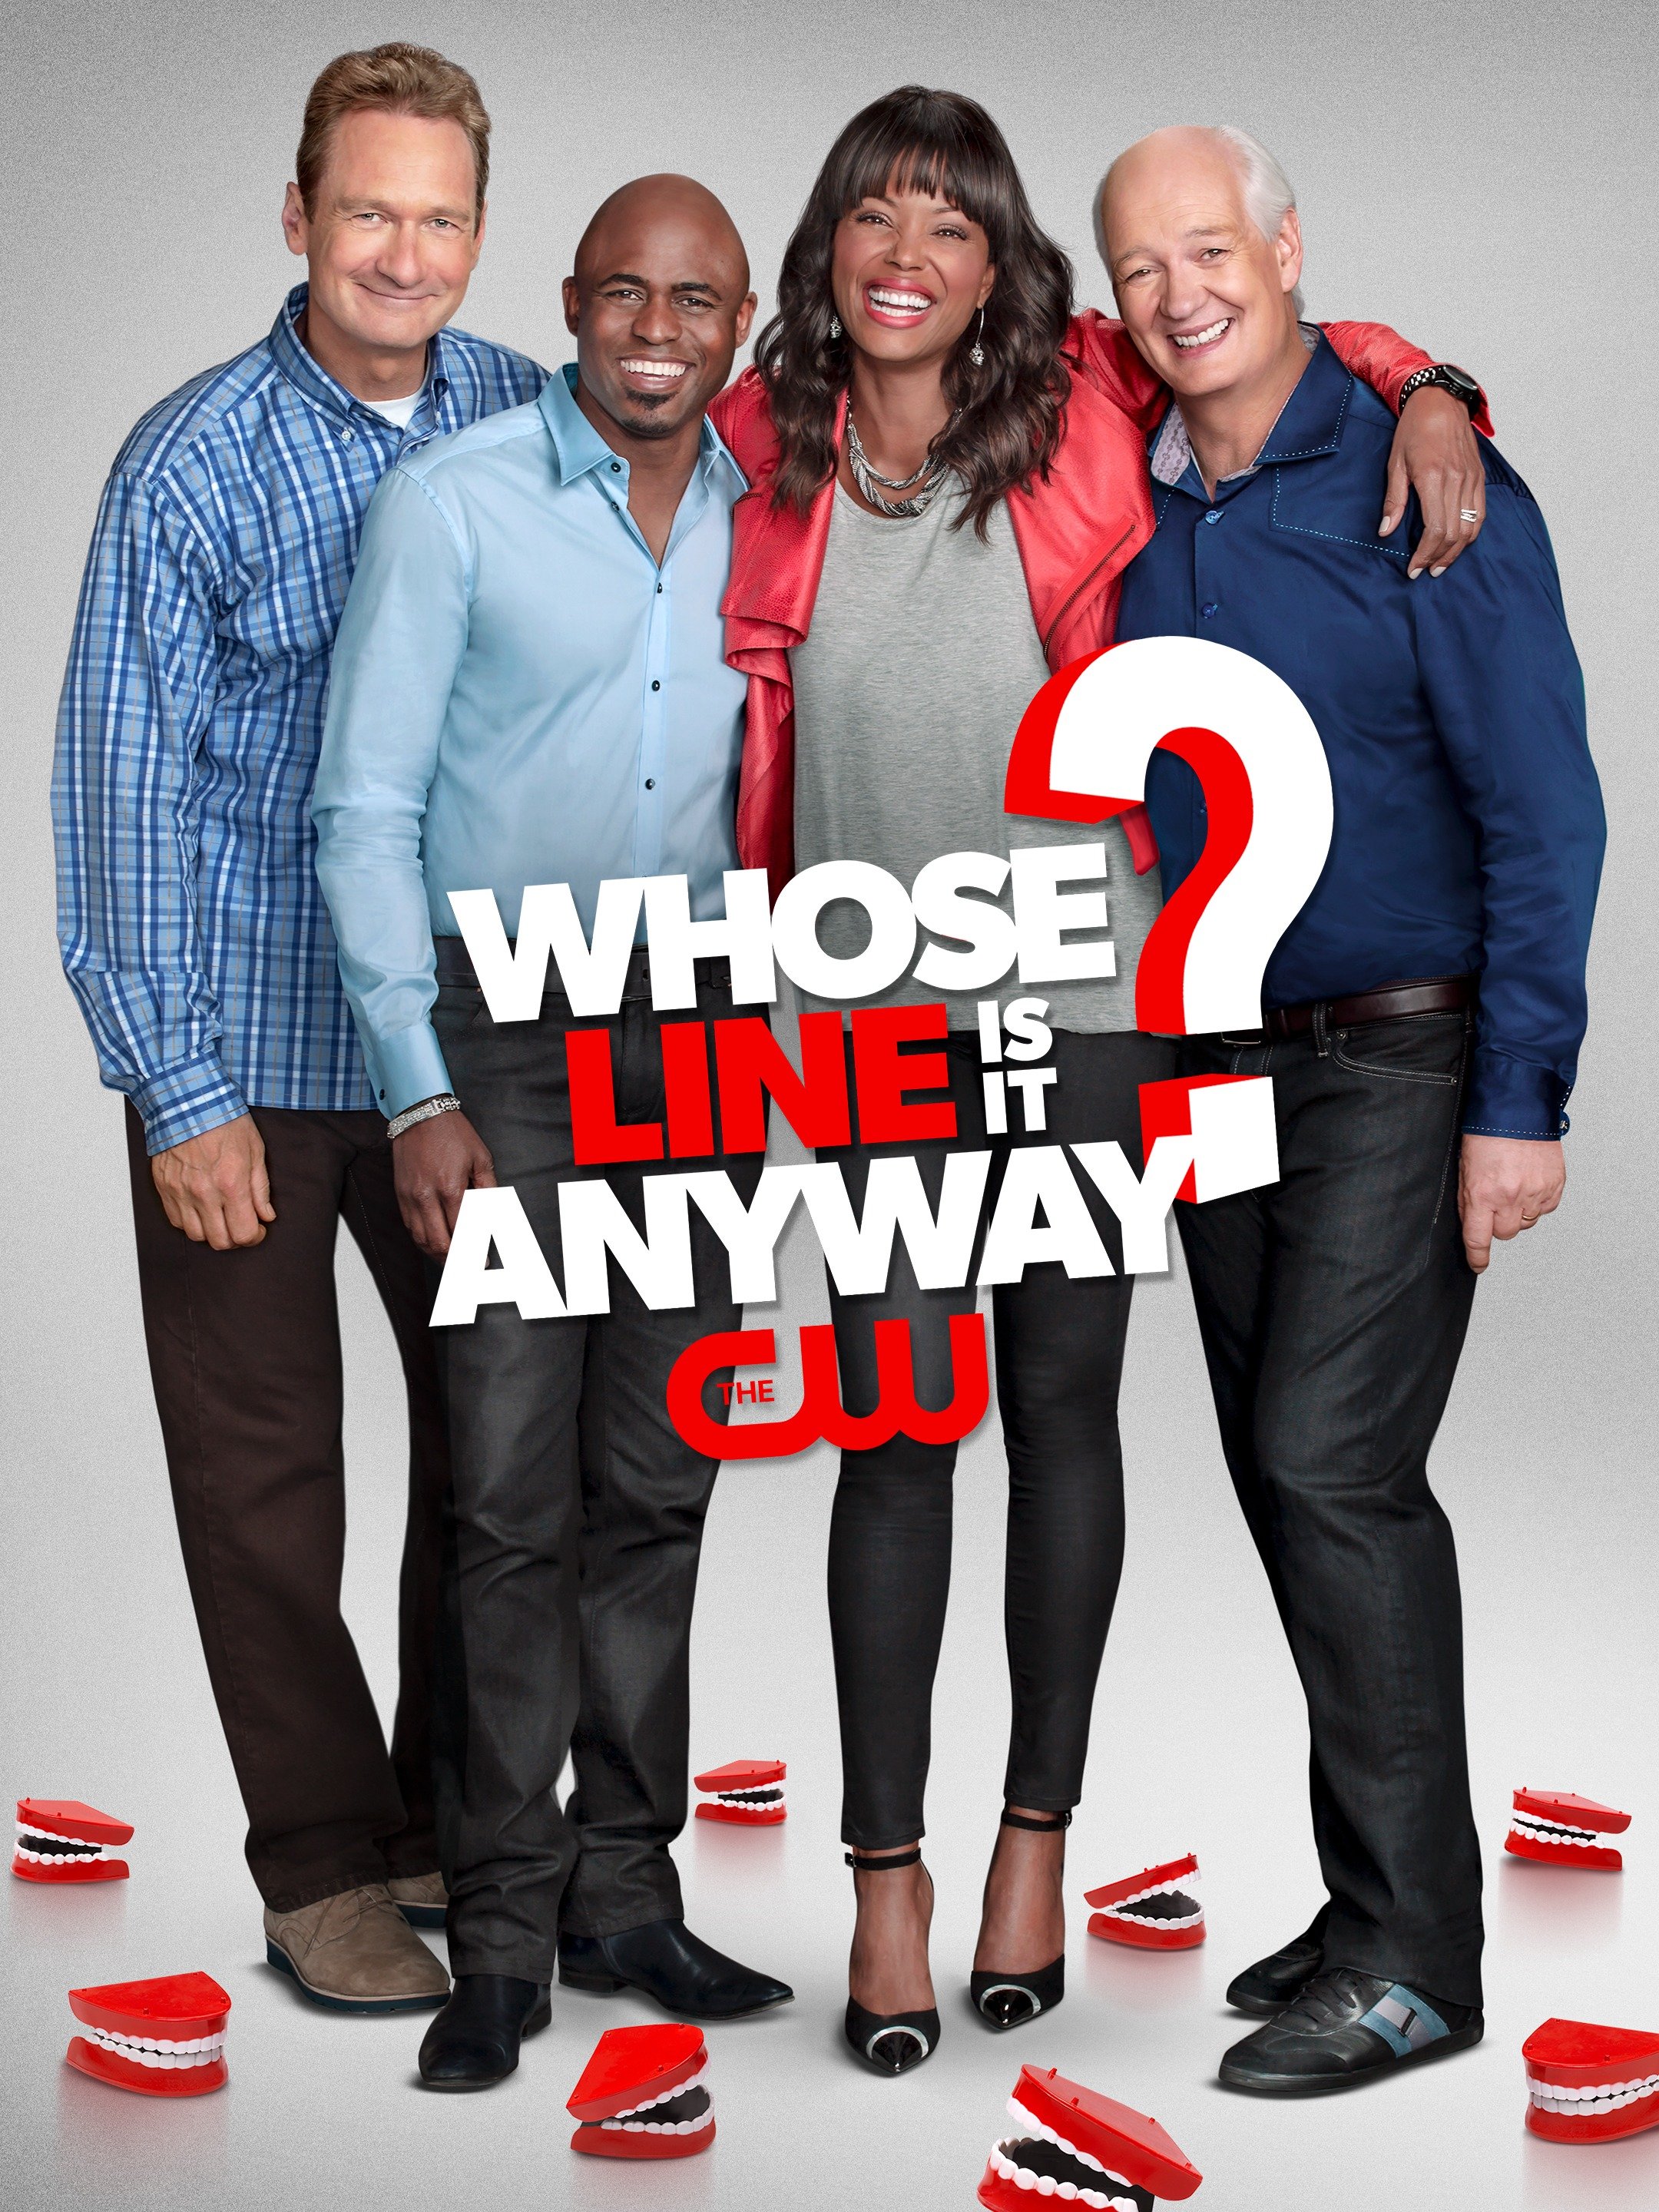 What's your opinion on Whose Line Is It Anyway?